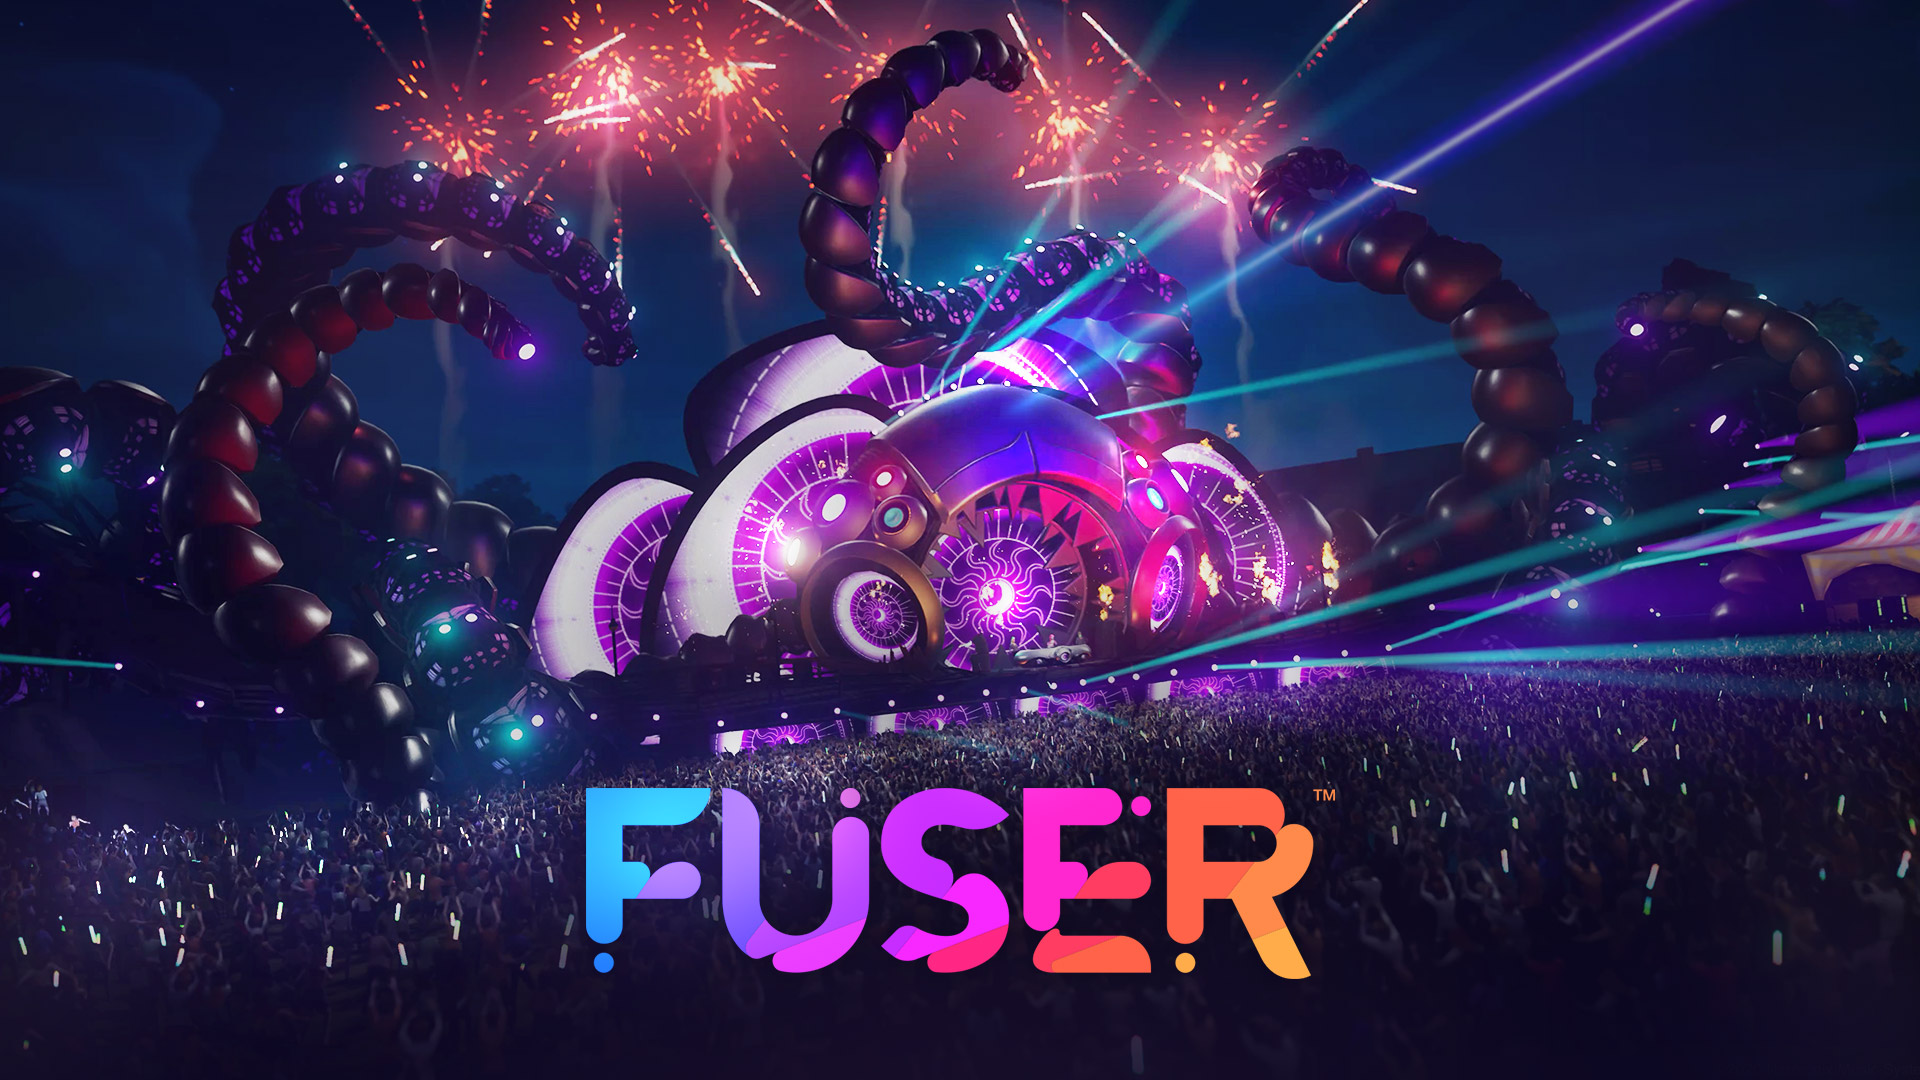 Music party game FUSER is shutting down